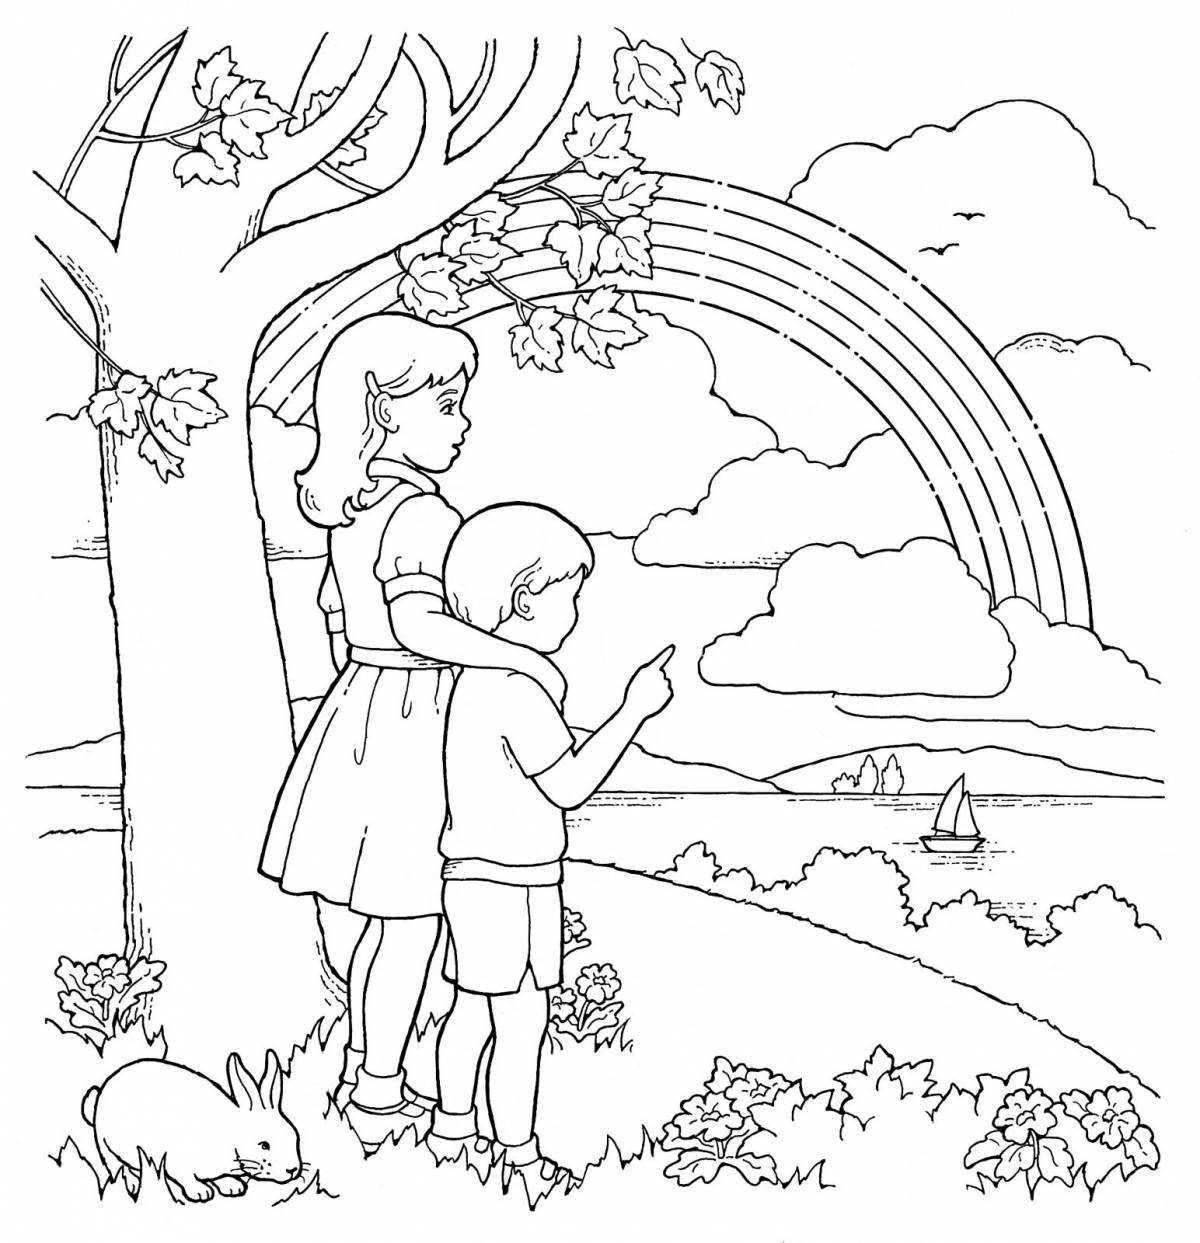 Majestic sky world coloring book